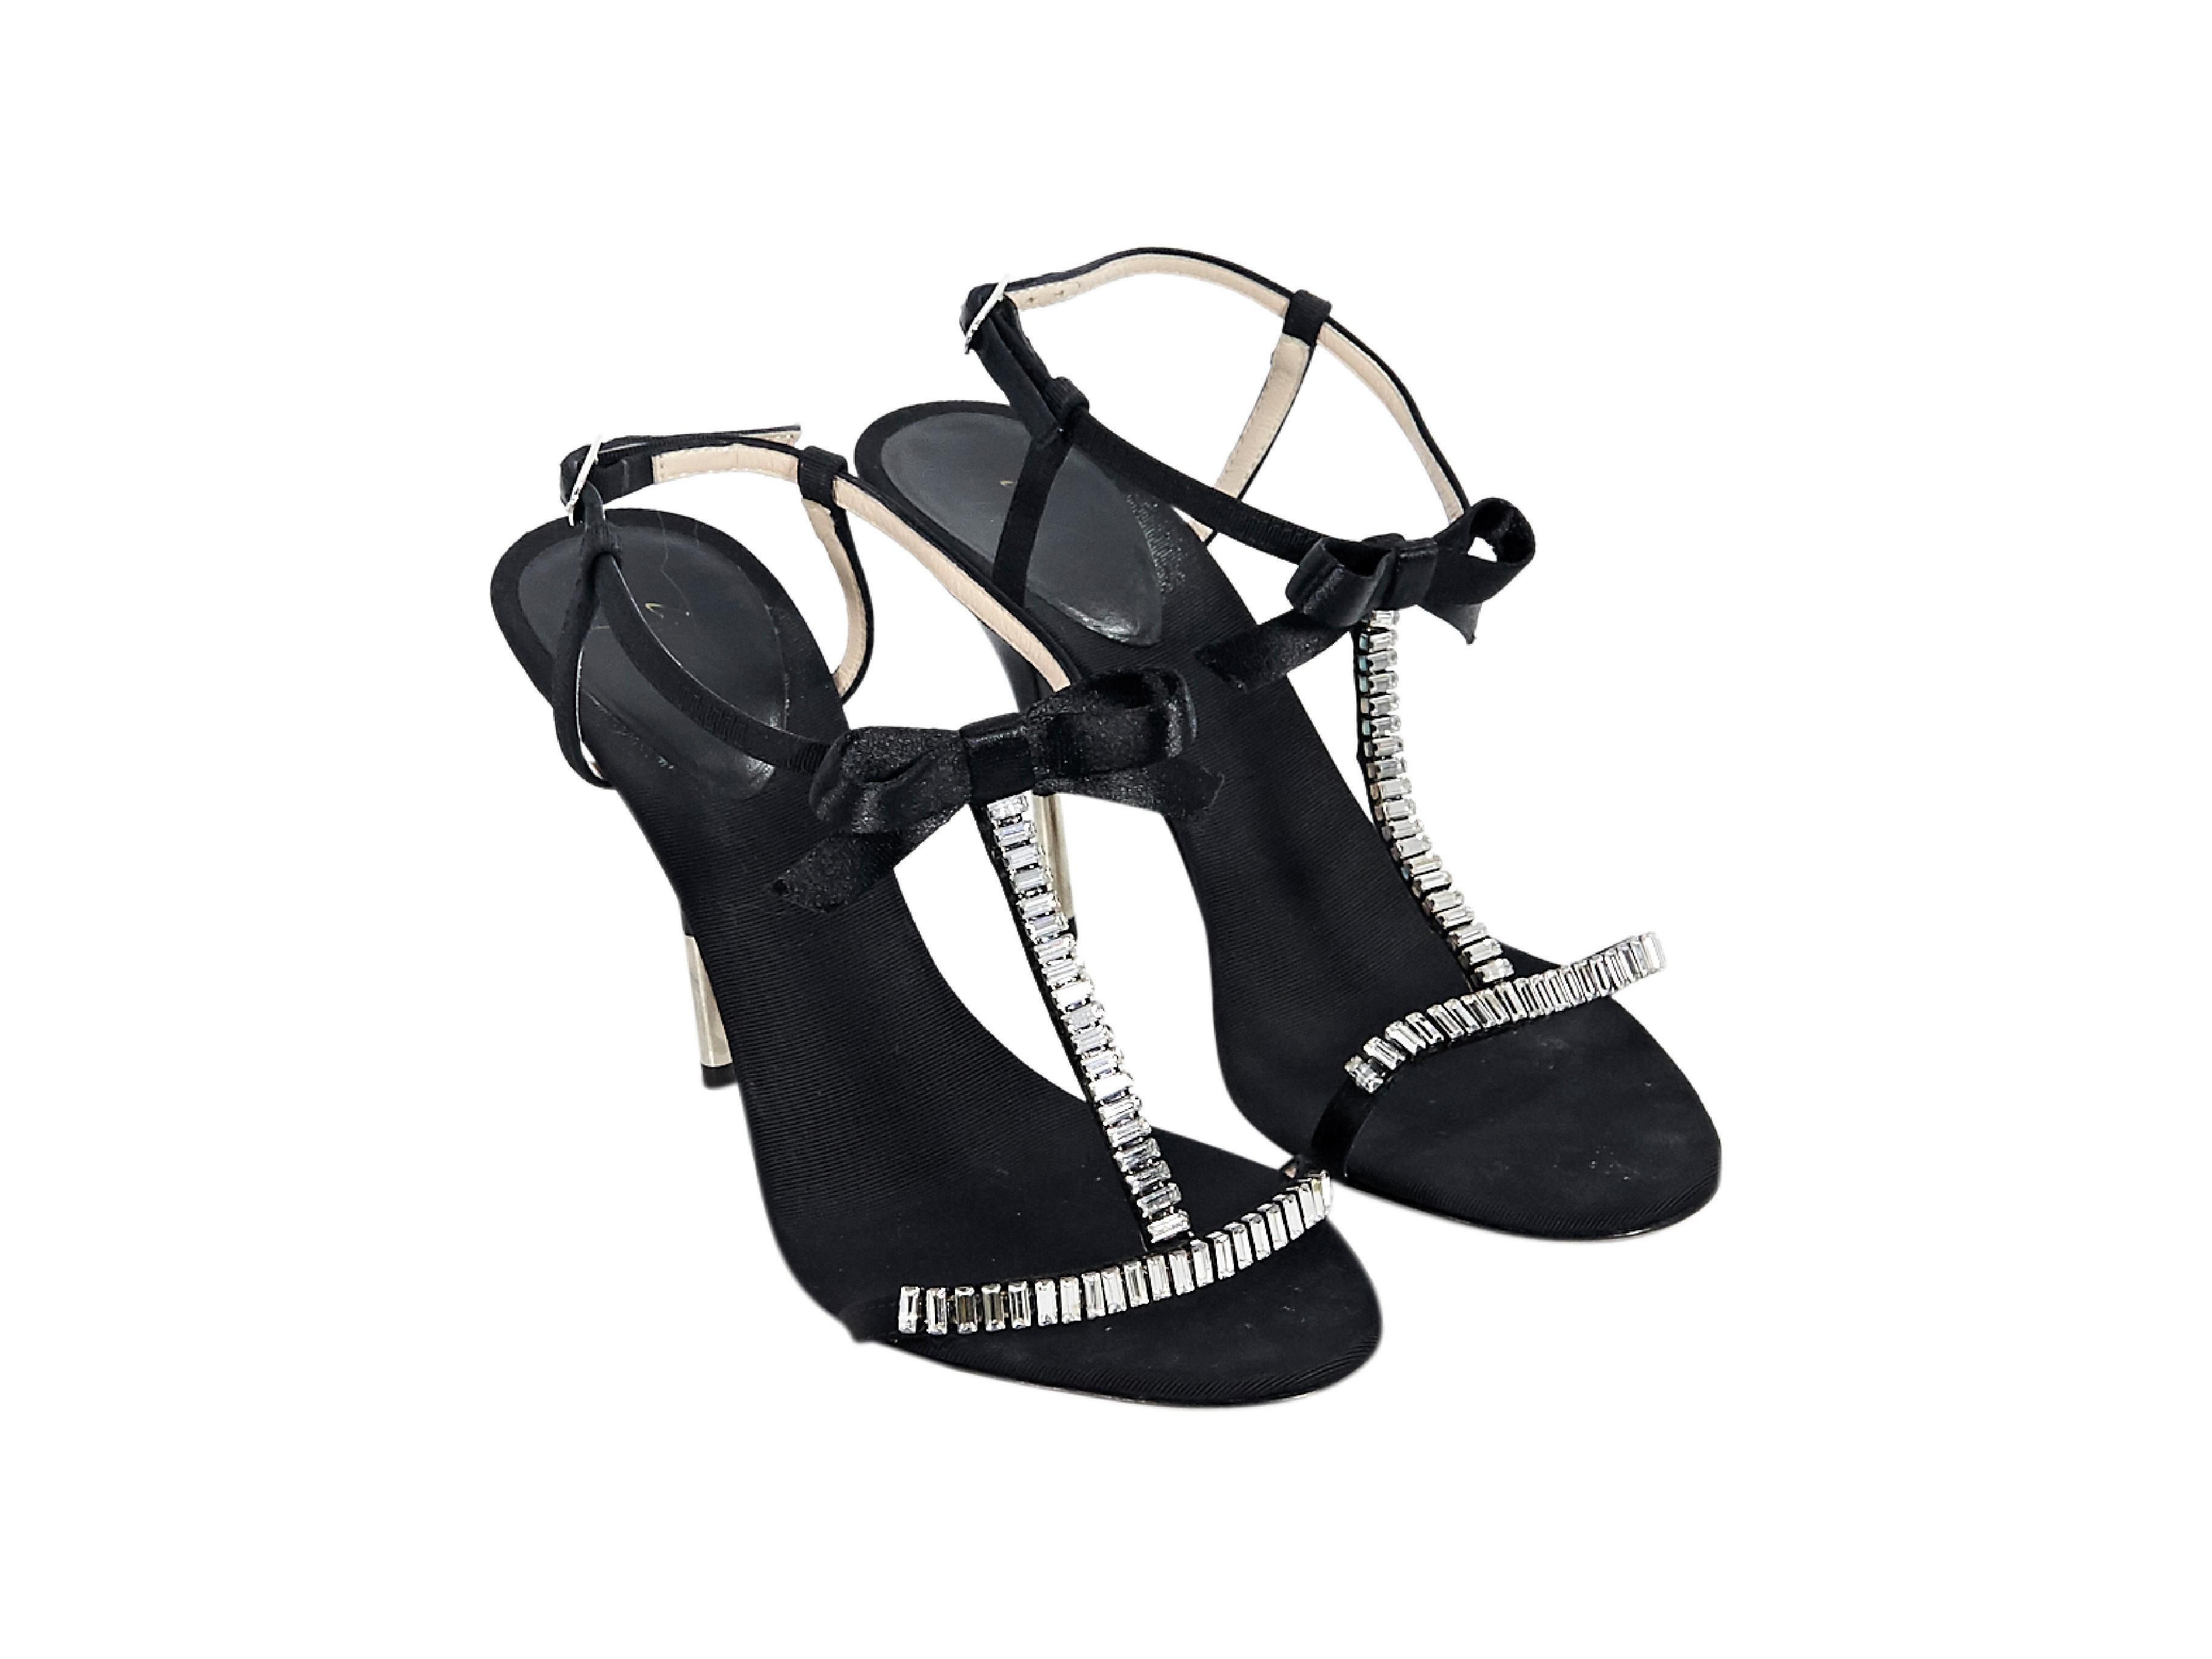 Product details:  Black slingback evening sandals by Giuseppe Zanotti.  Embellished with a bow and crystals.  Adjustable slingback strap.  Open toe.  Silvertone hardware.  Original box and dust bag included.  4